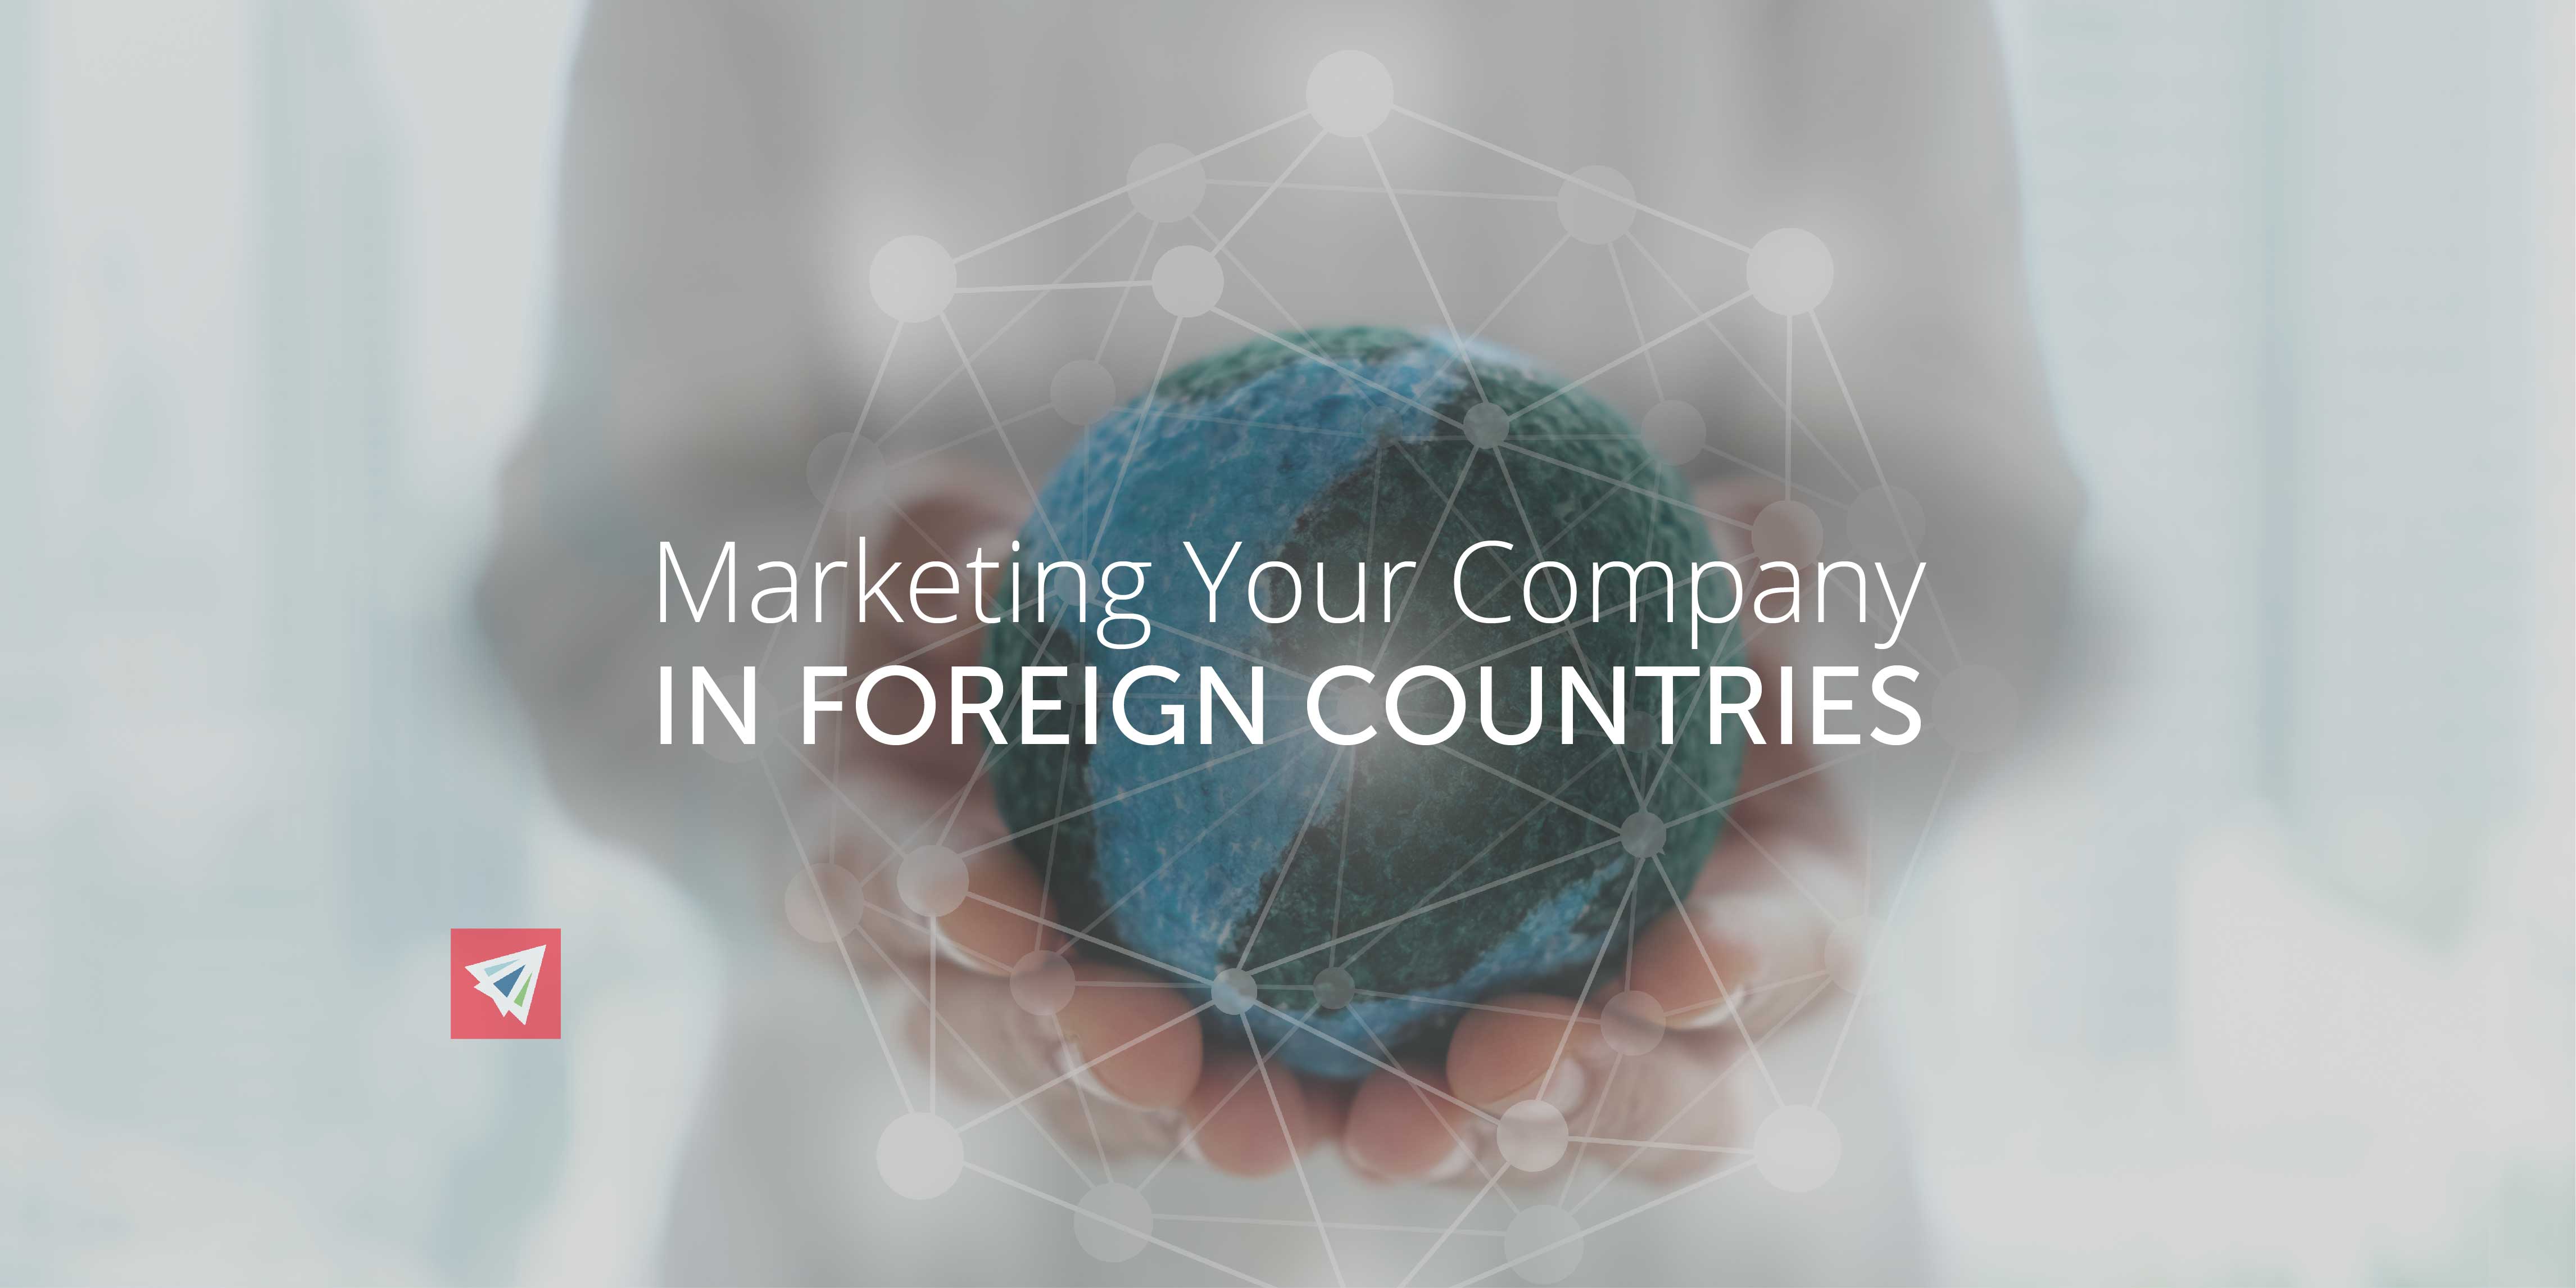 Marketing Your Company in Foreign Countries